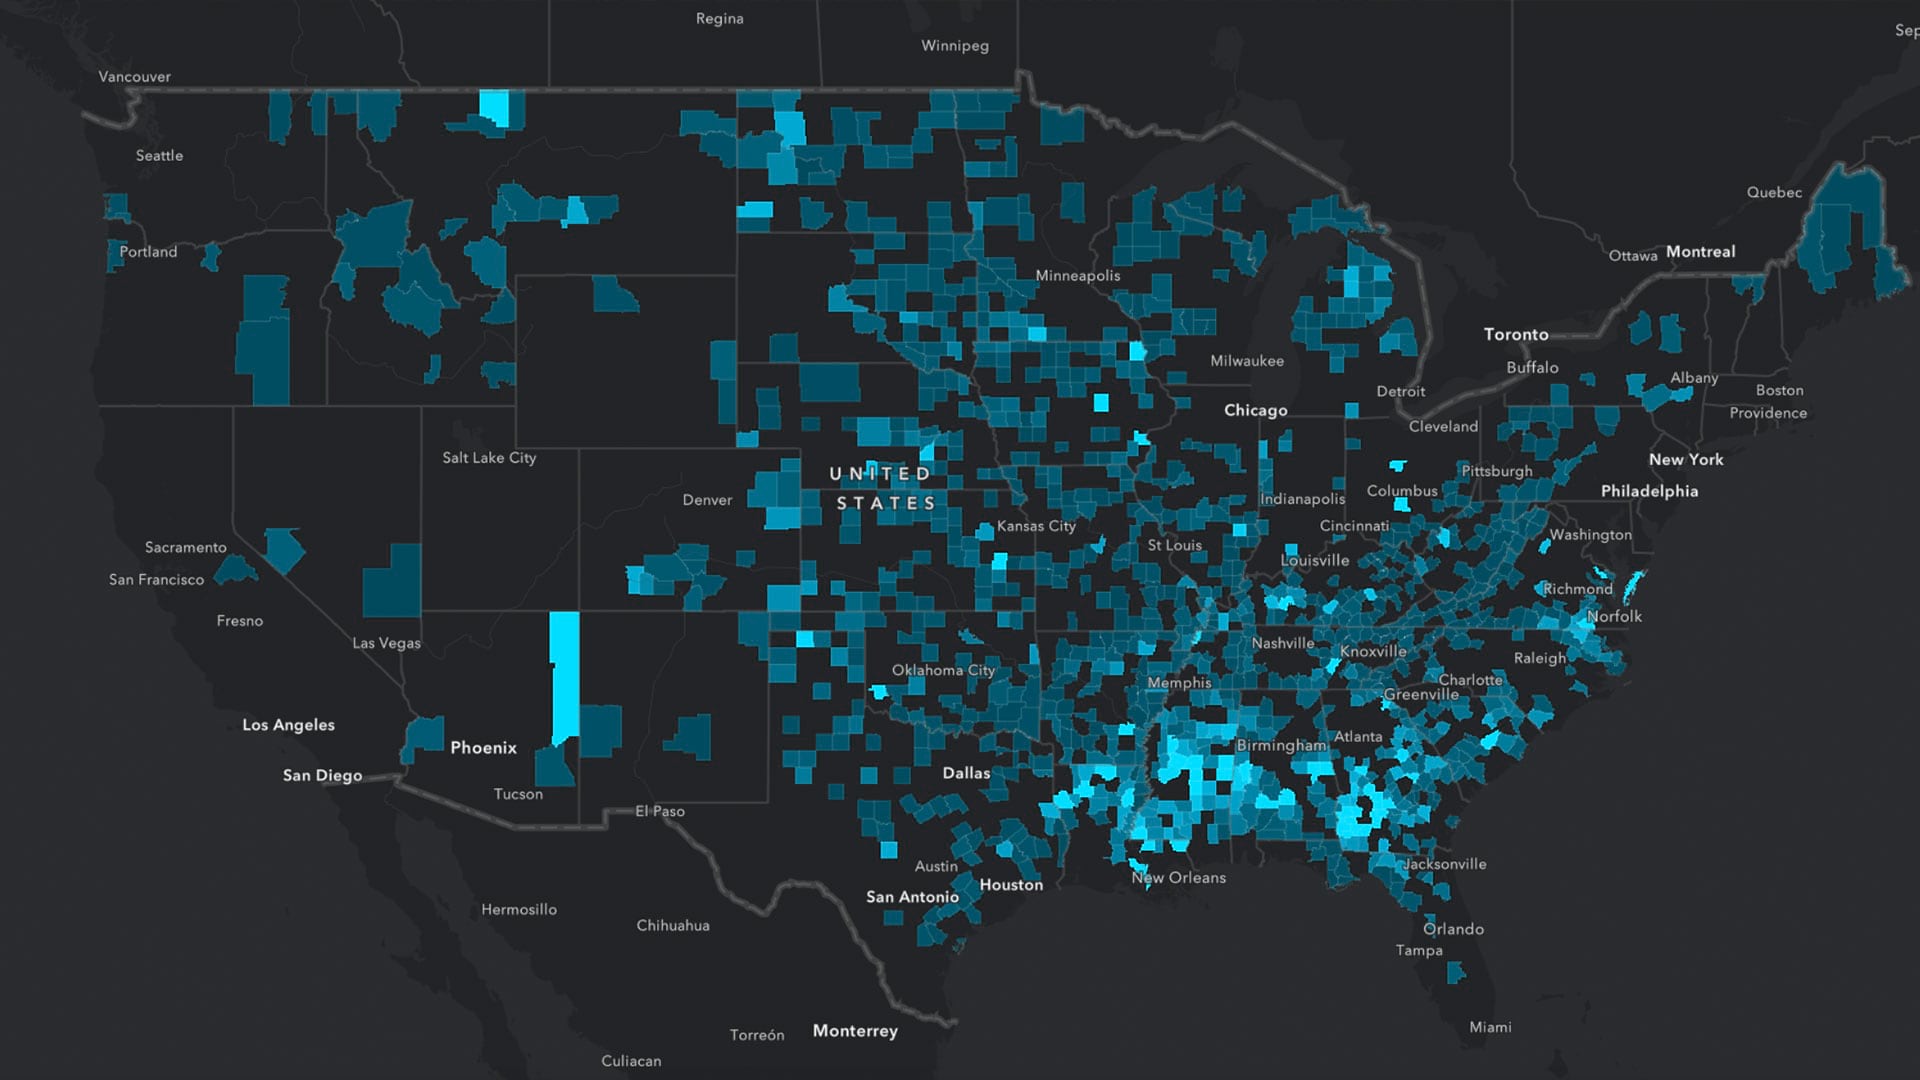 COVID-19 cases across the United States on a smart map